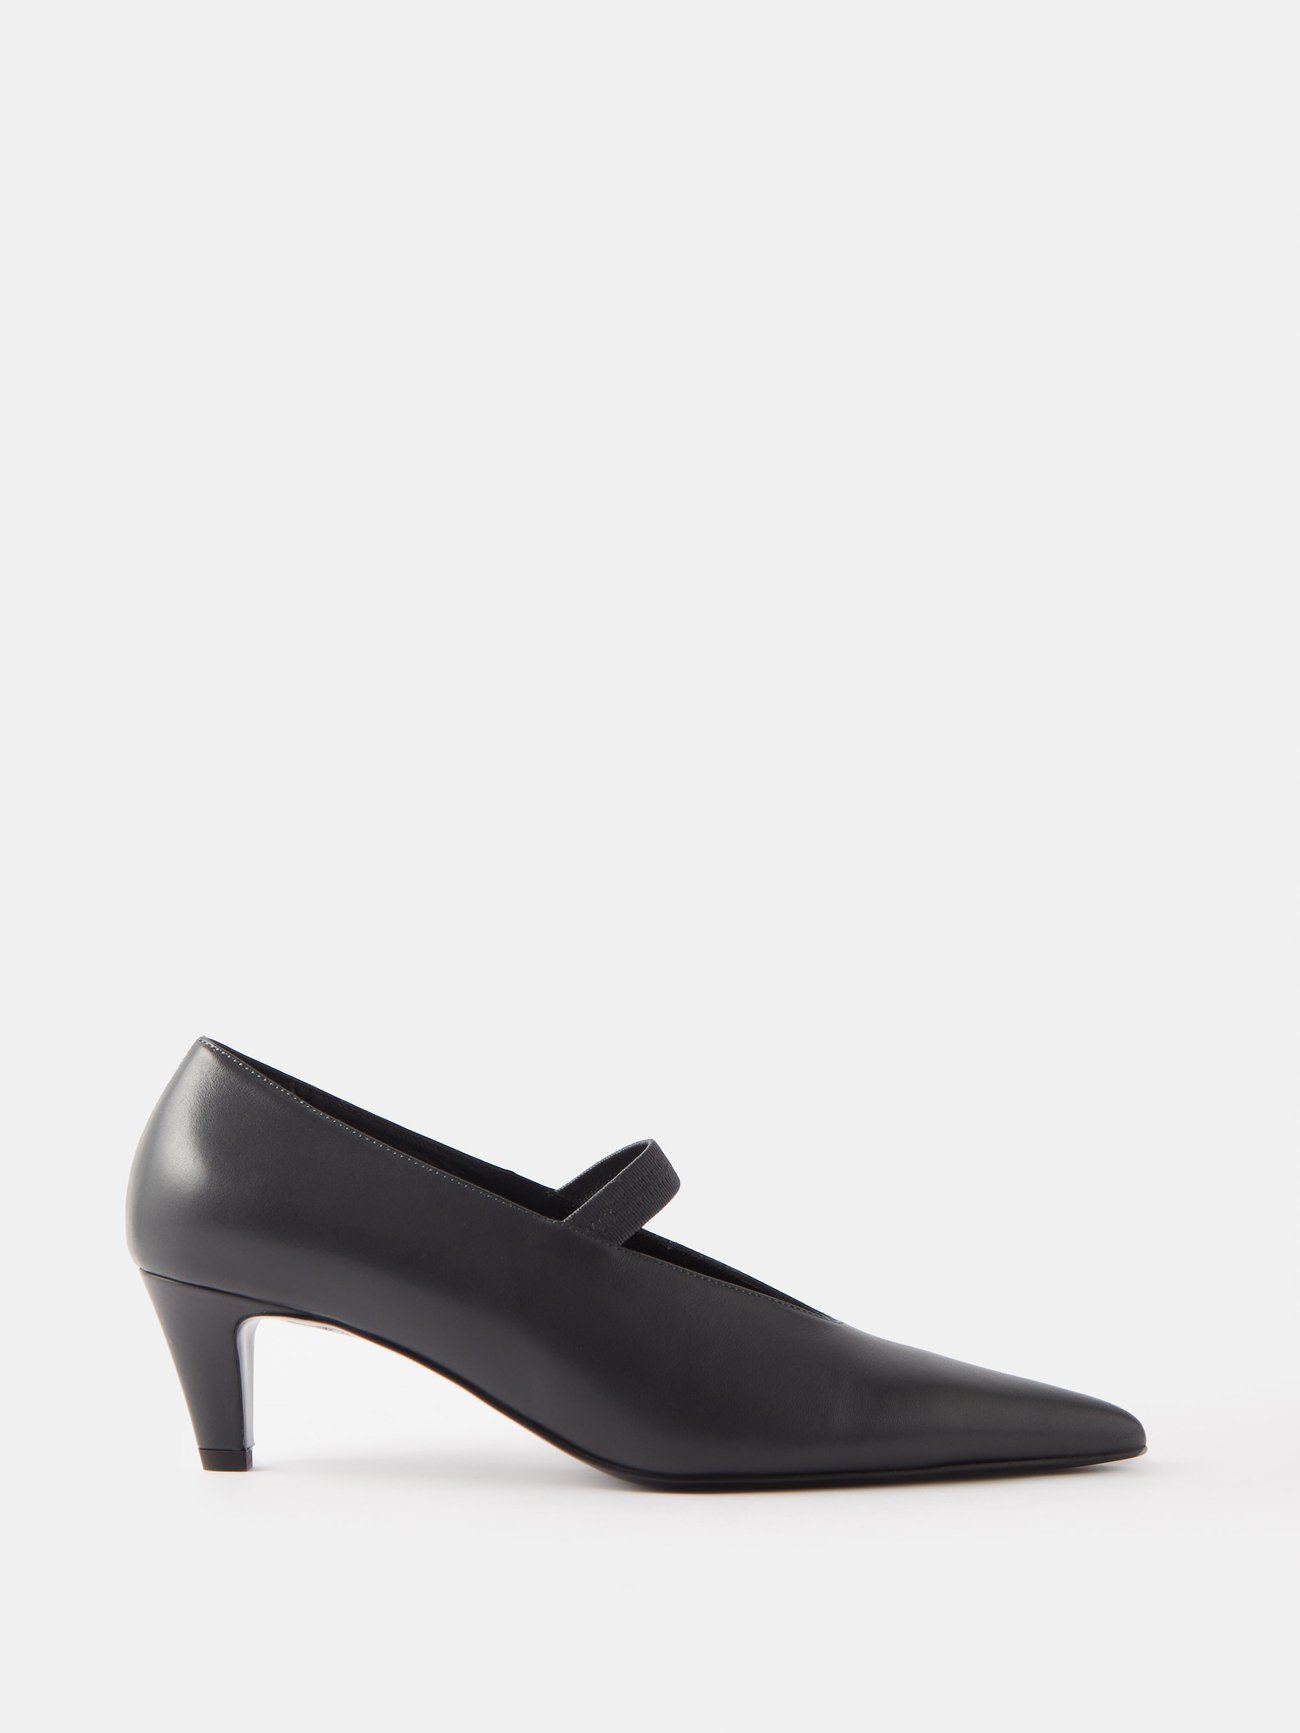 Black Point-toe leather Mary Jane pumps | Toteme | MATCHES UK